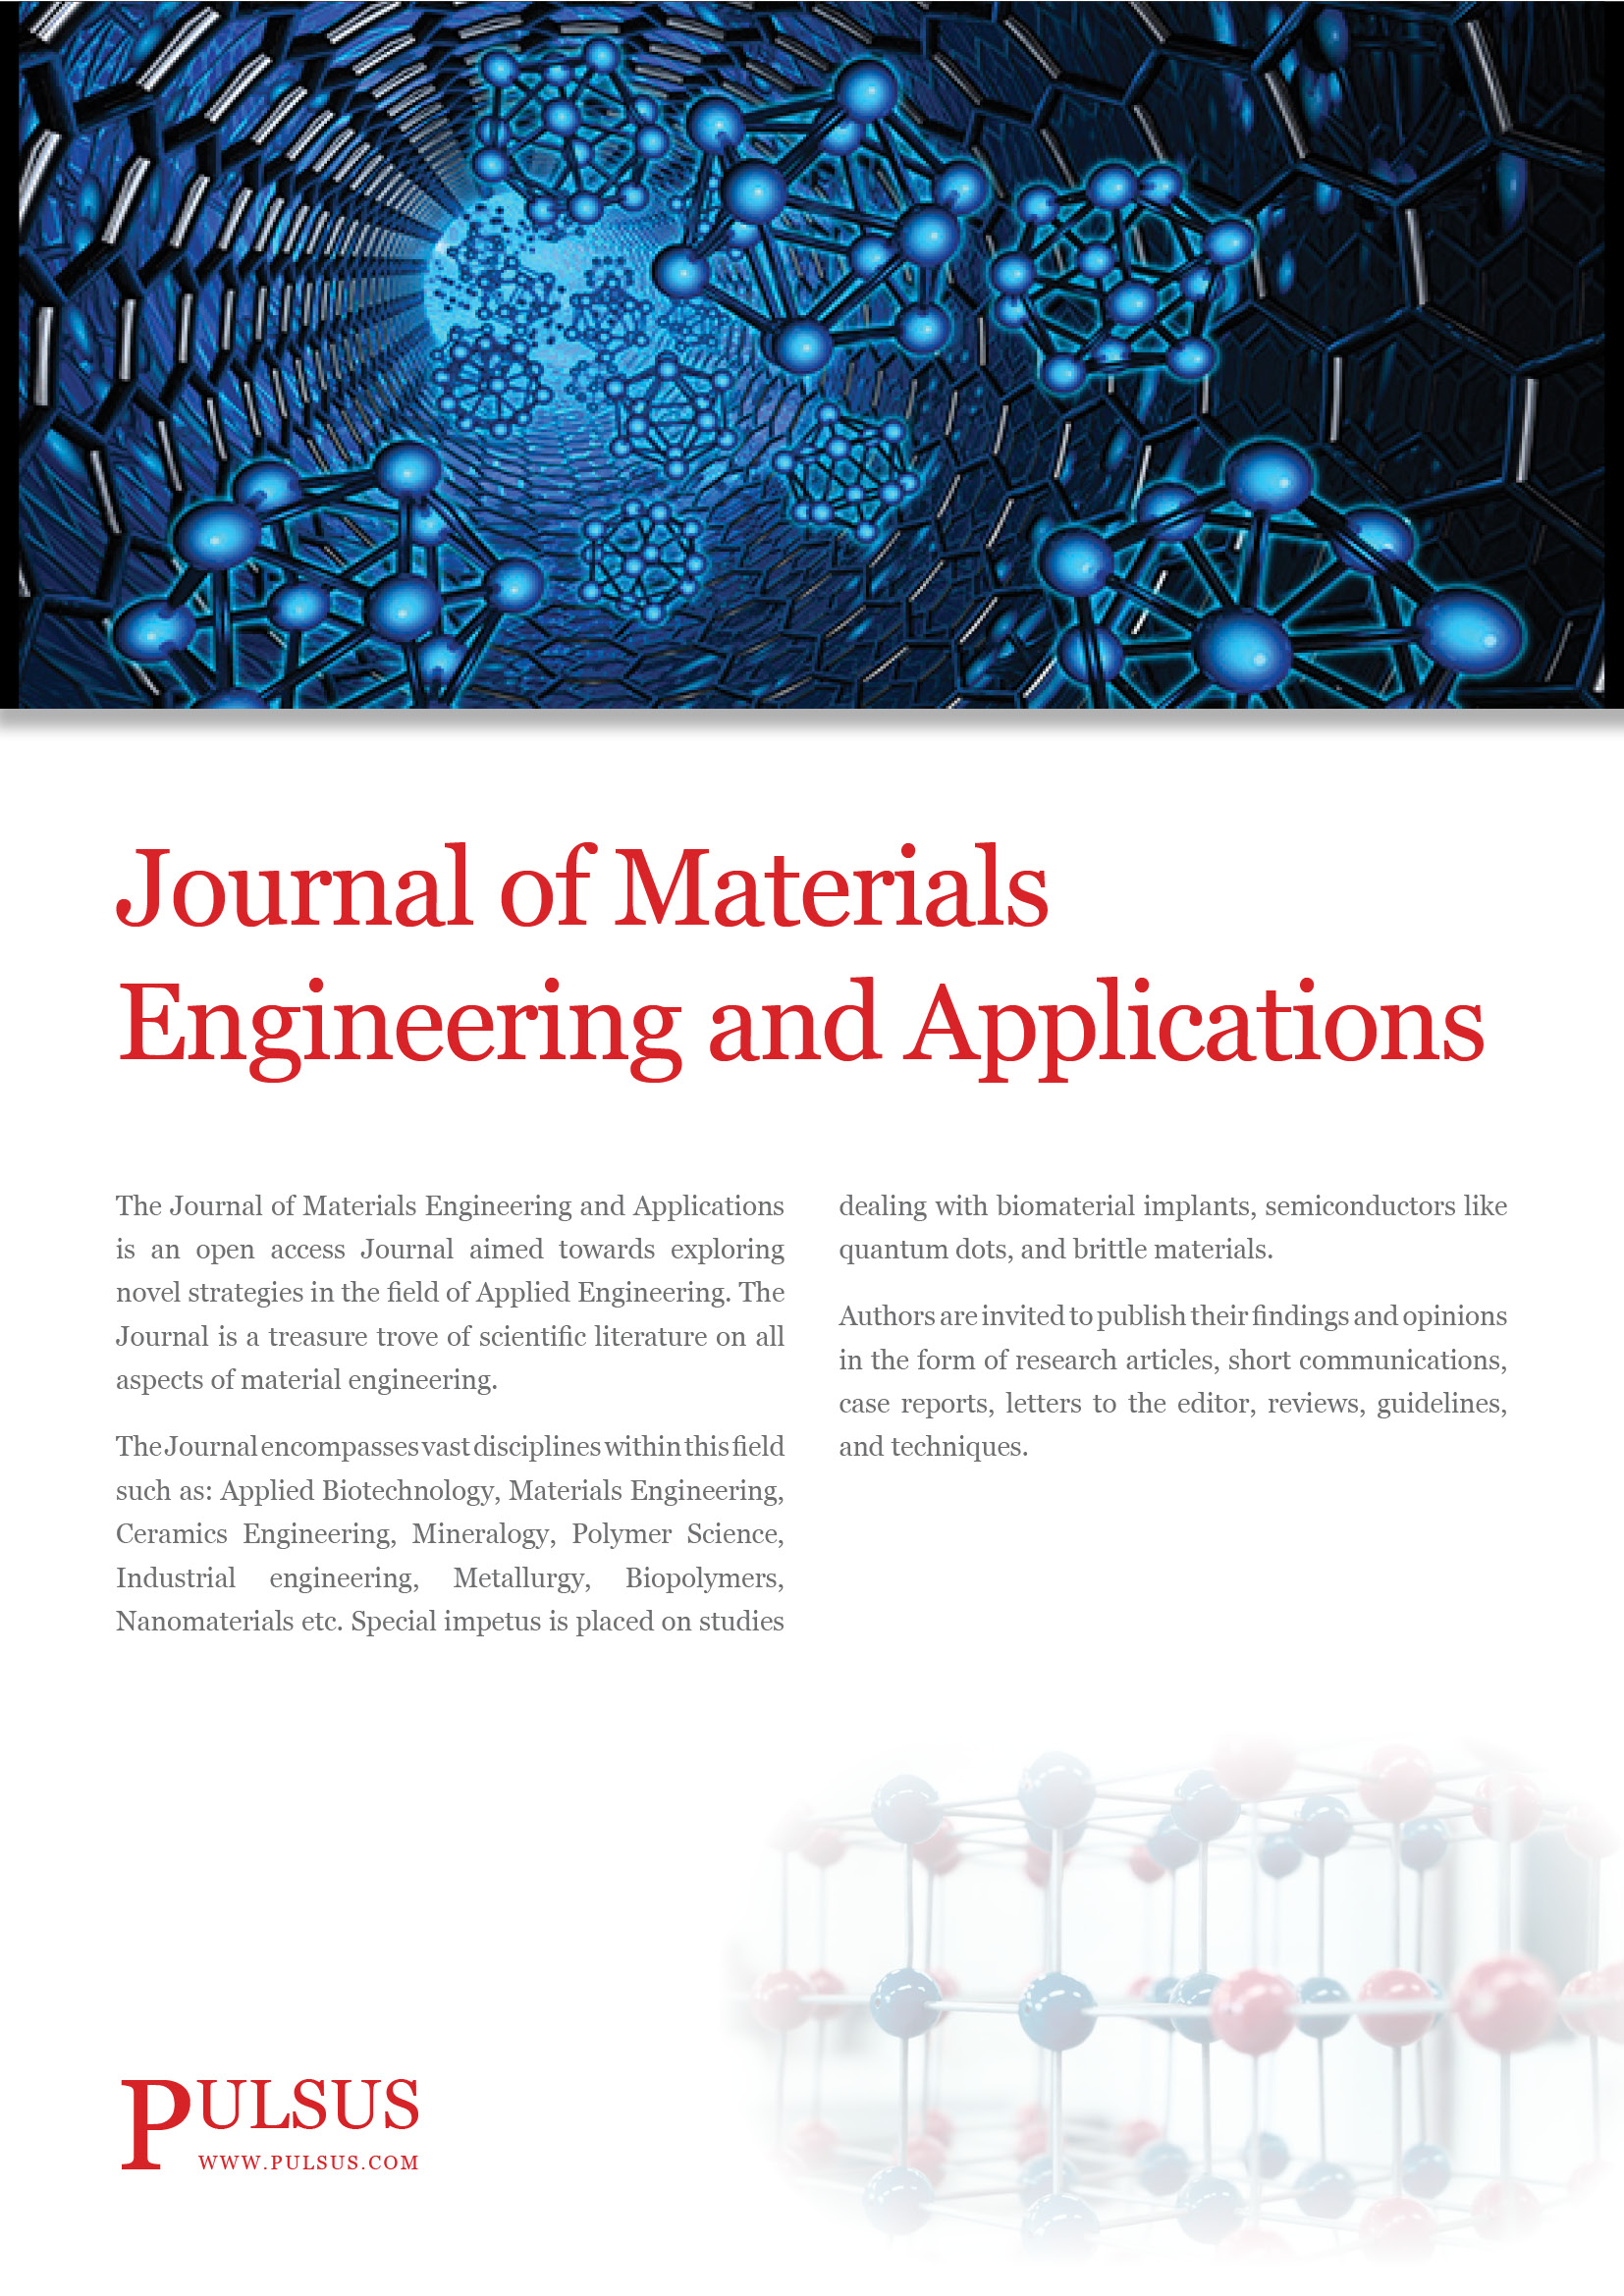 Journal of Materials Engineering and Applications